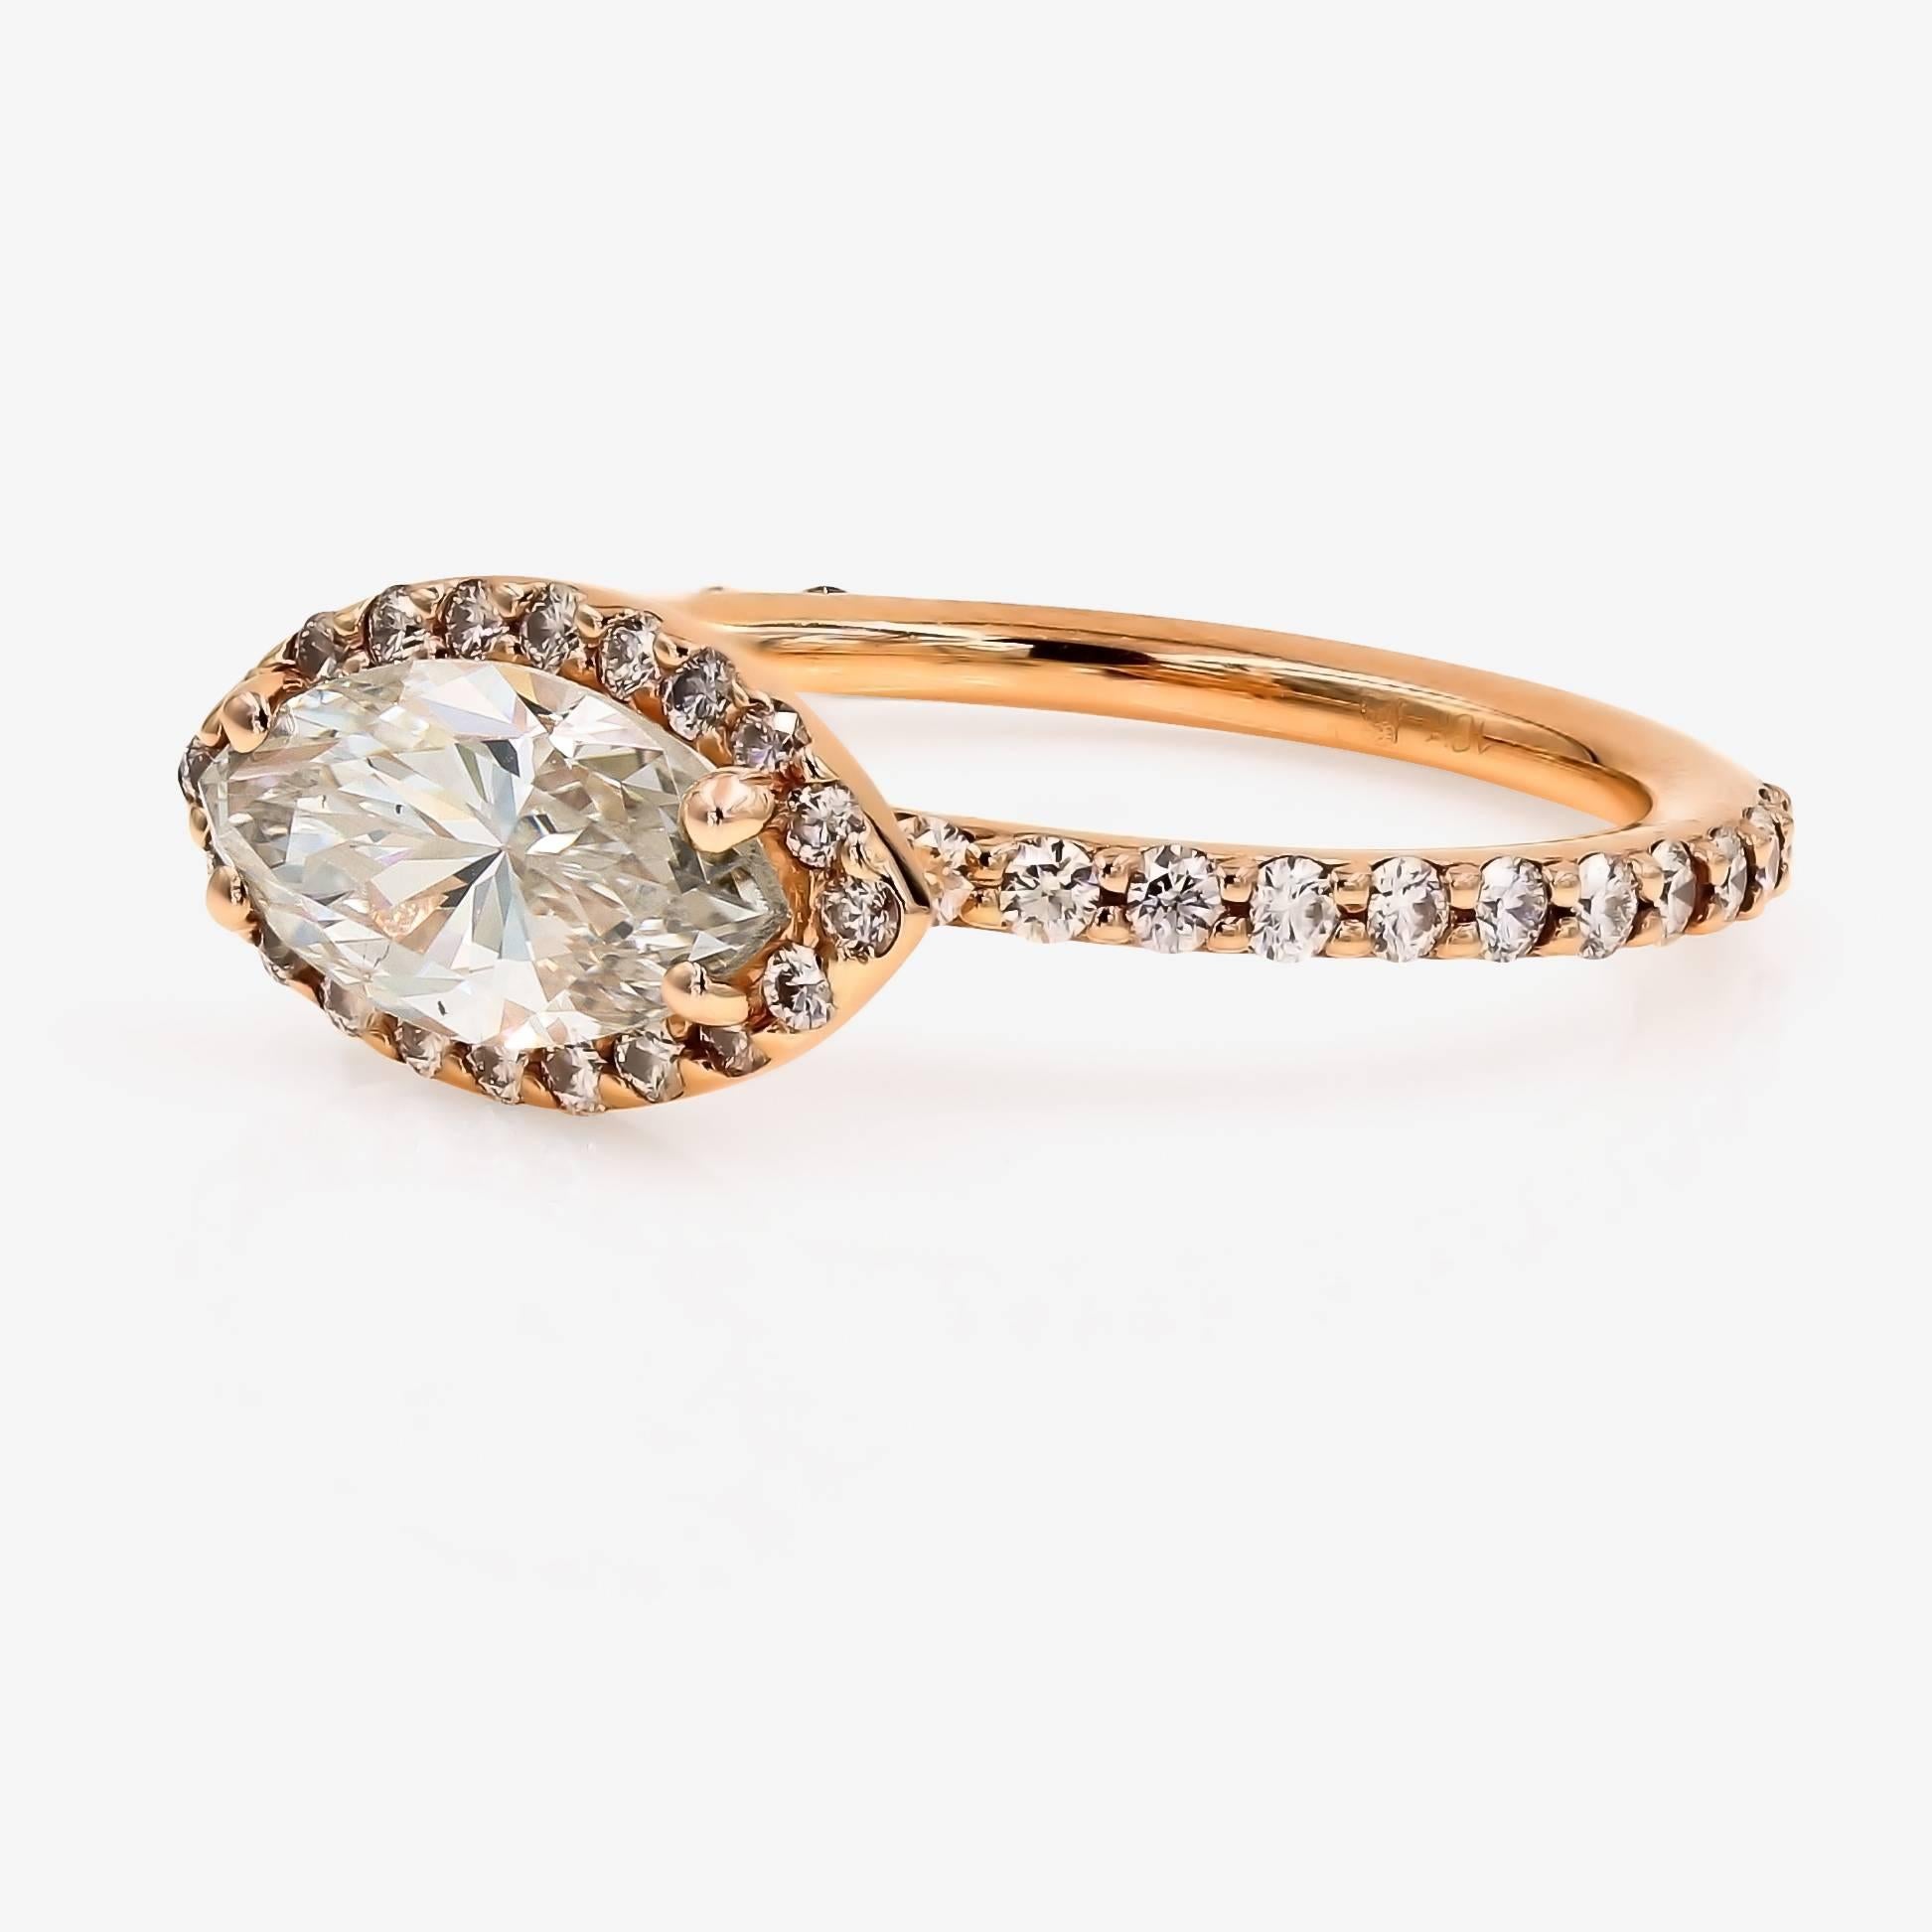 Contemporary GIA Certified 1.51cts. Marquise & Ideal Cut Round Diamond Ring in 18kt Rose Gold